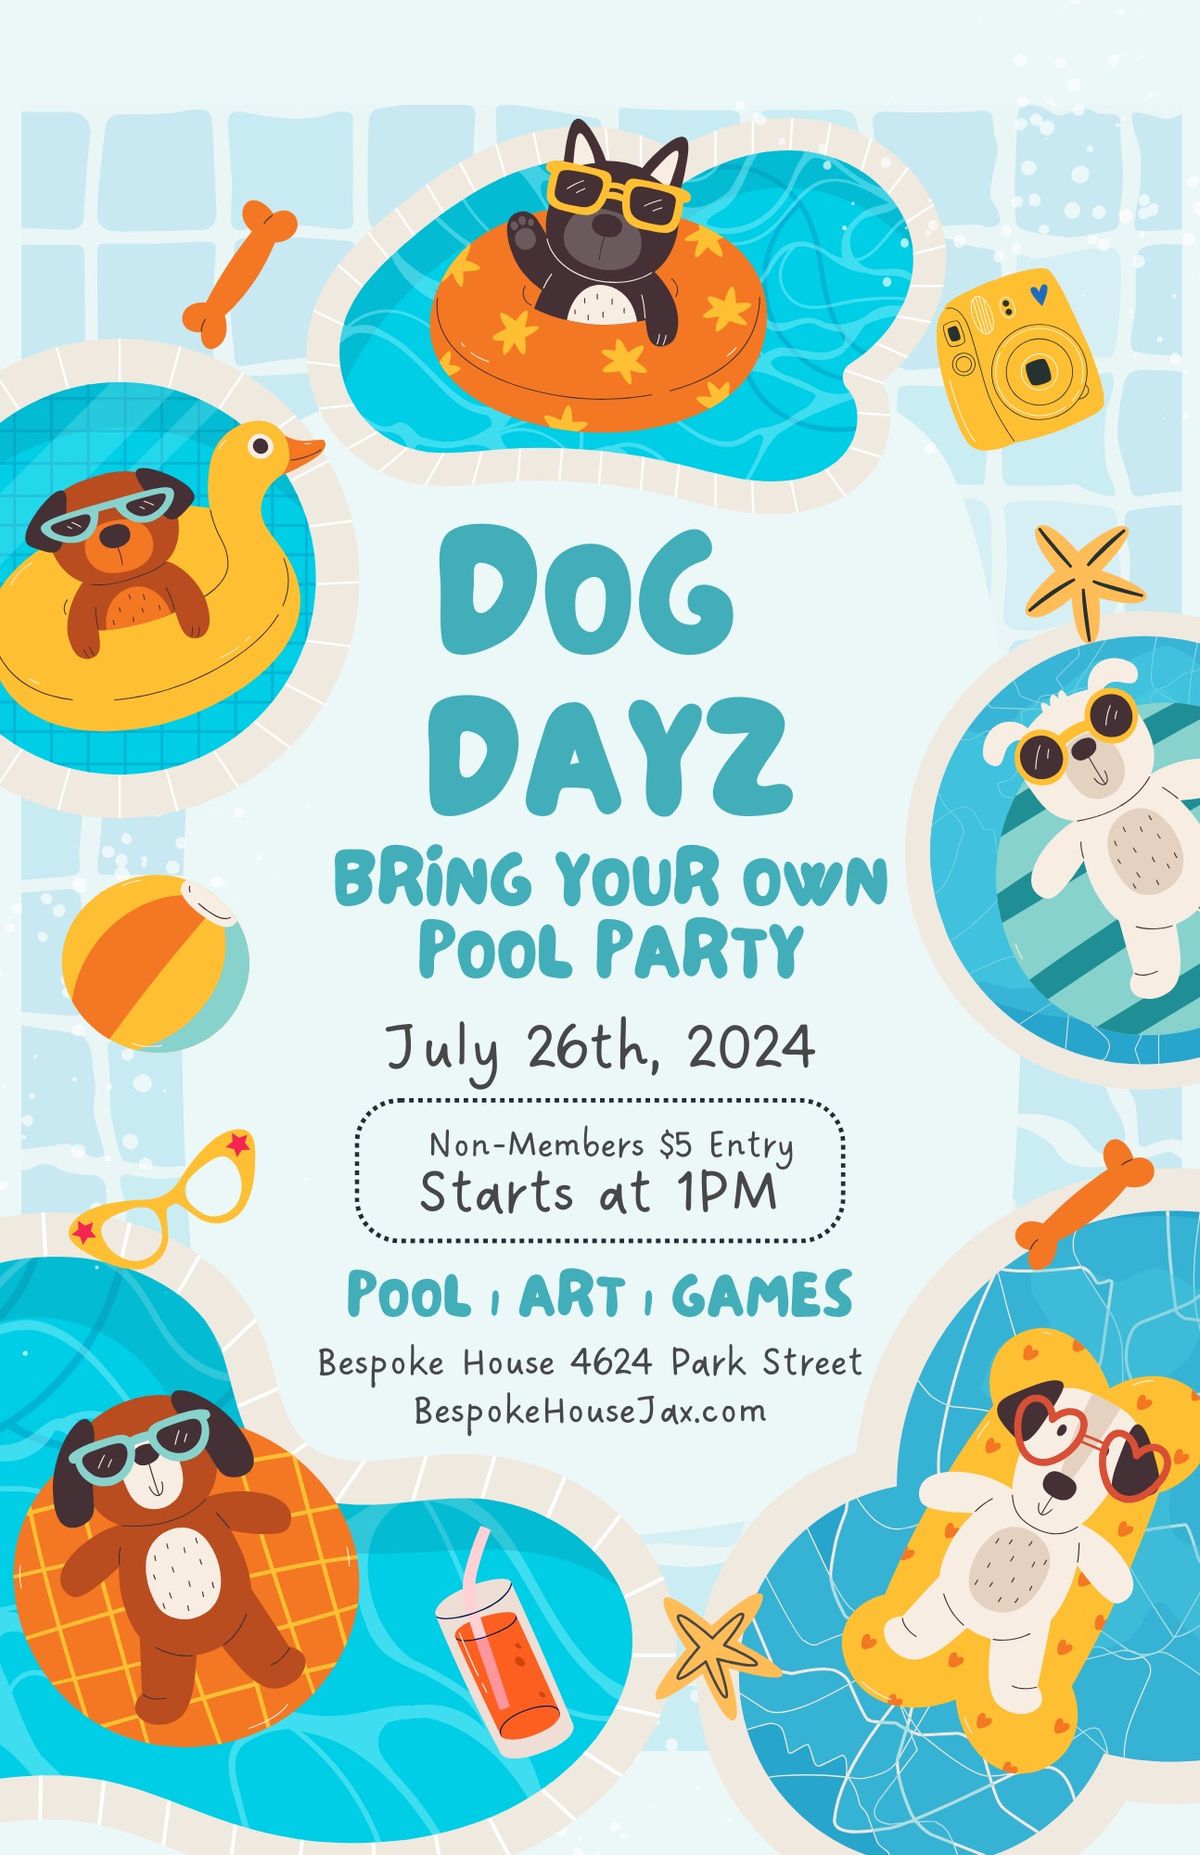 Dog Dayz Bring Your Own Pool Party